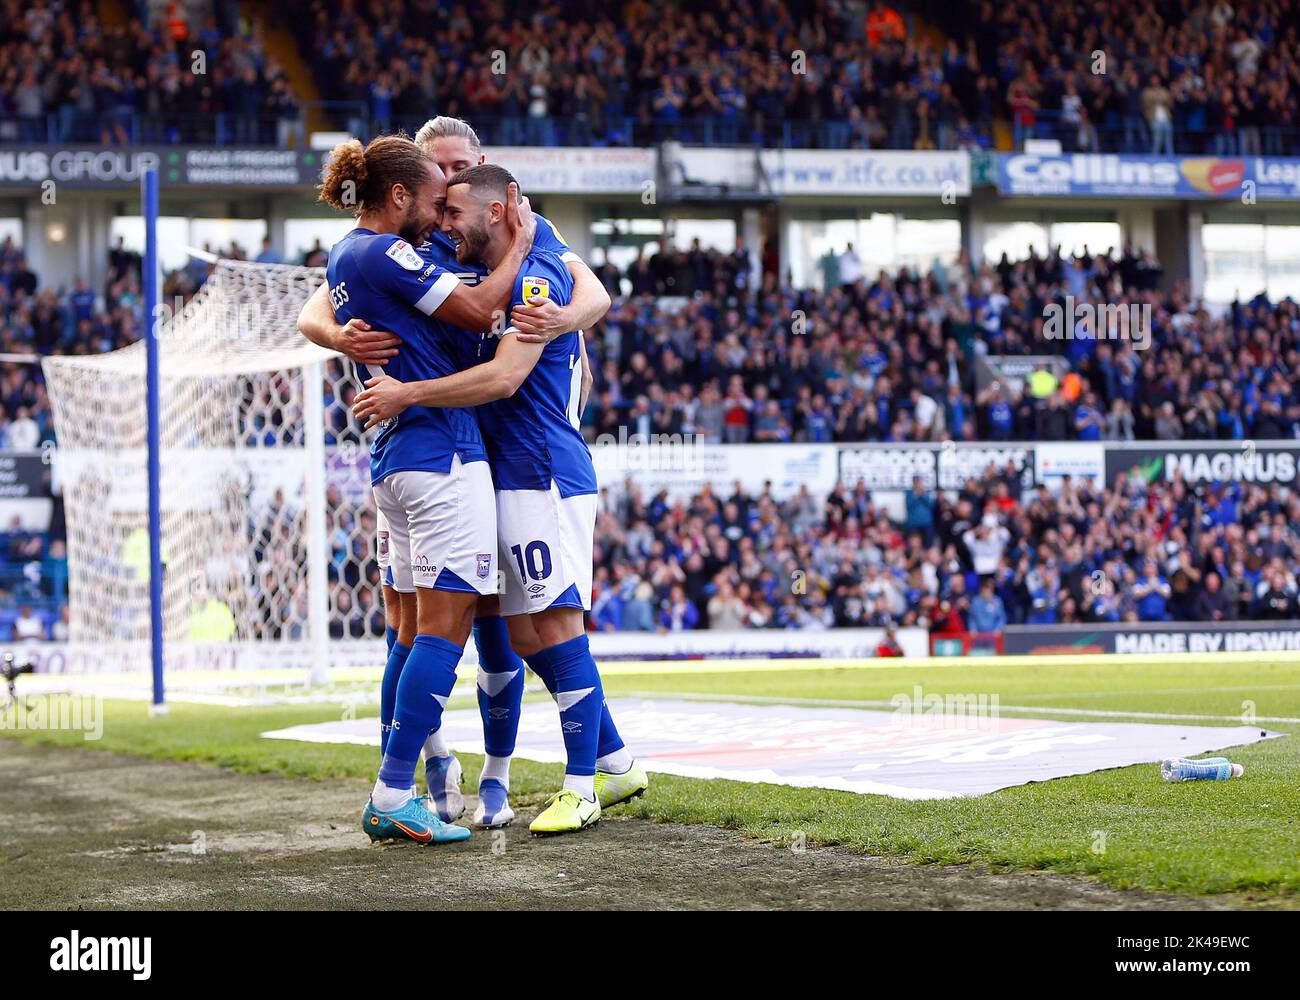 Ipswich, UK. 01st Oct, 2022. Marcus Harness of Ipswich Town (L) celebrates with teammates after scoring the first goal of the game during the Sky Bet League One match between Ipswich Town and Portsmouth at Portman Road on October 1st 2022 in Ipswich, England. (Photo by Mick Kearns/phcimages.com) Credit: PHC Images/Alamy Live News Stock Photo